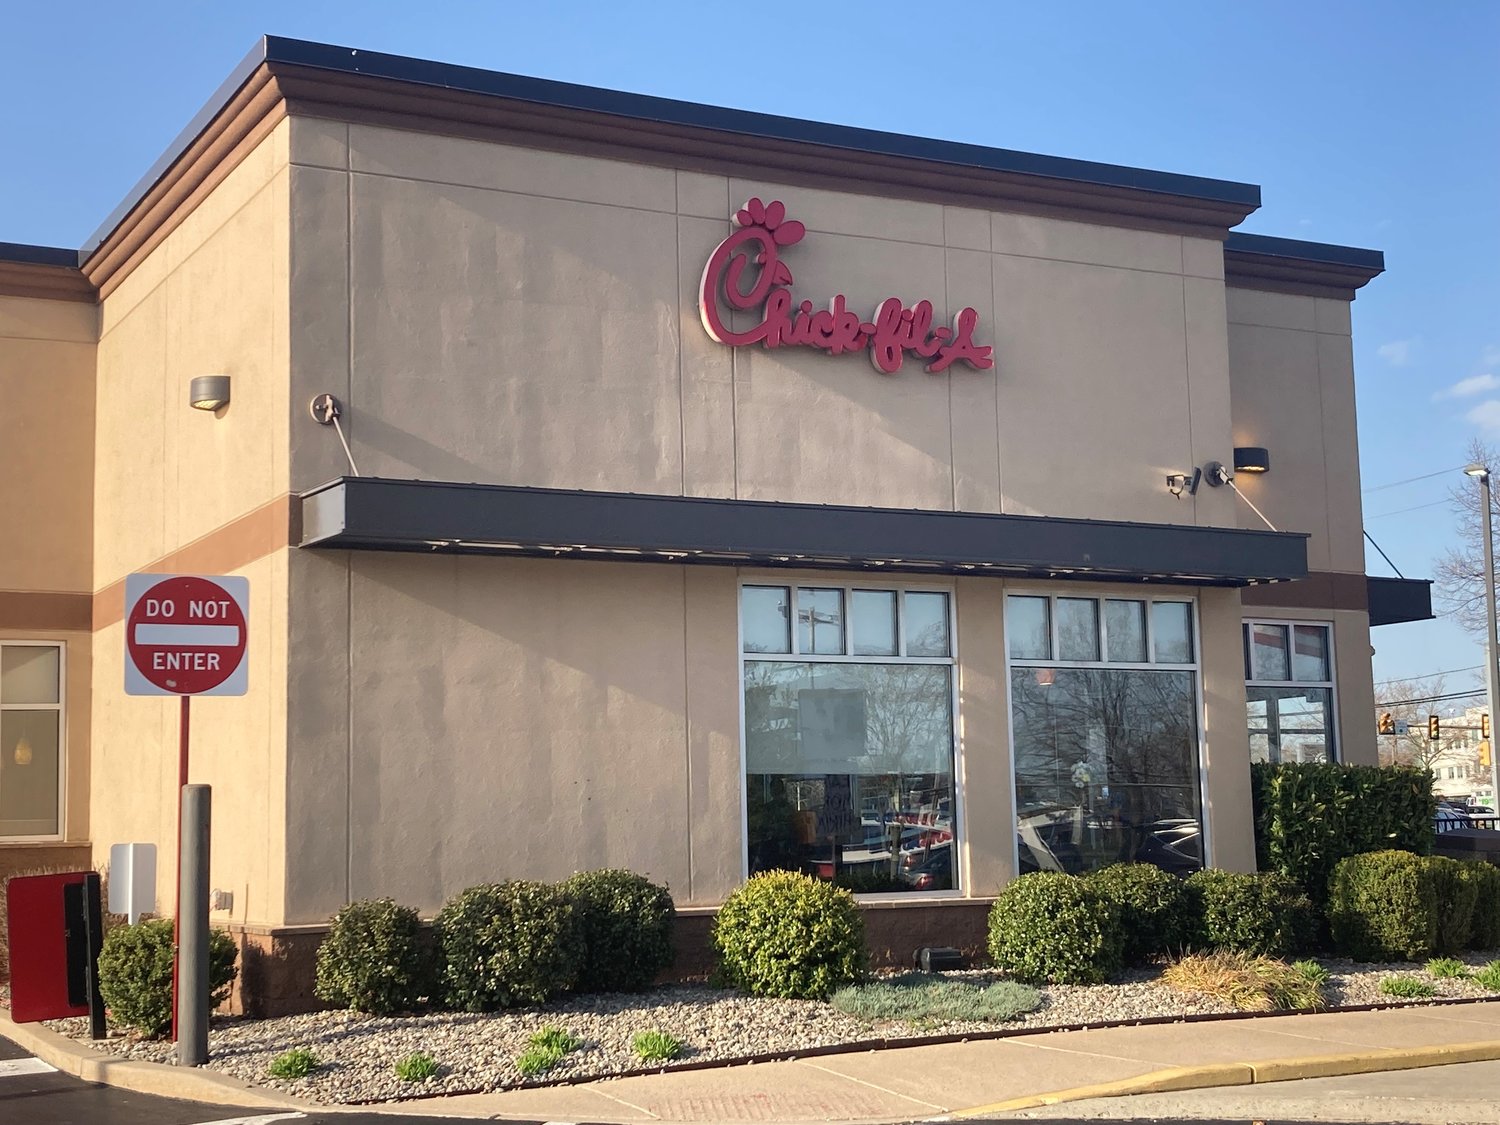 The existing Middletown Chick-fil-A is located at Lincoln Plaza next to the Oxford Valley Mall.